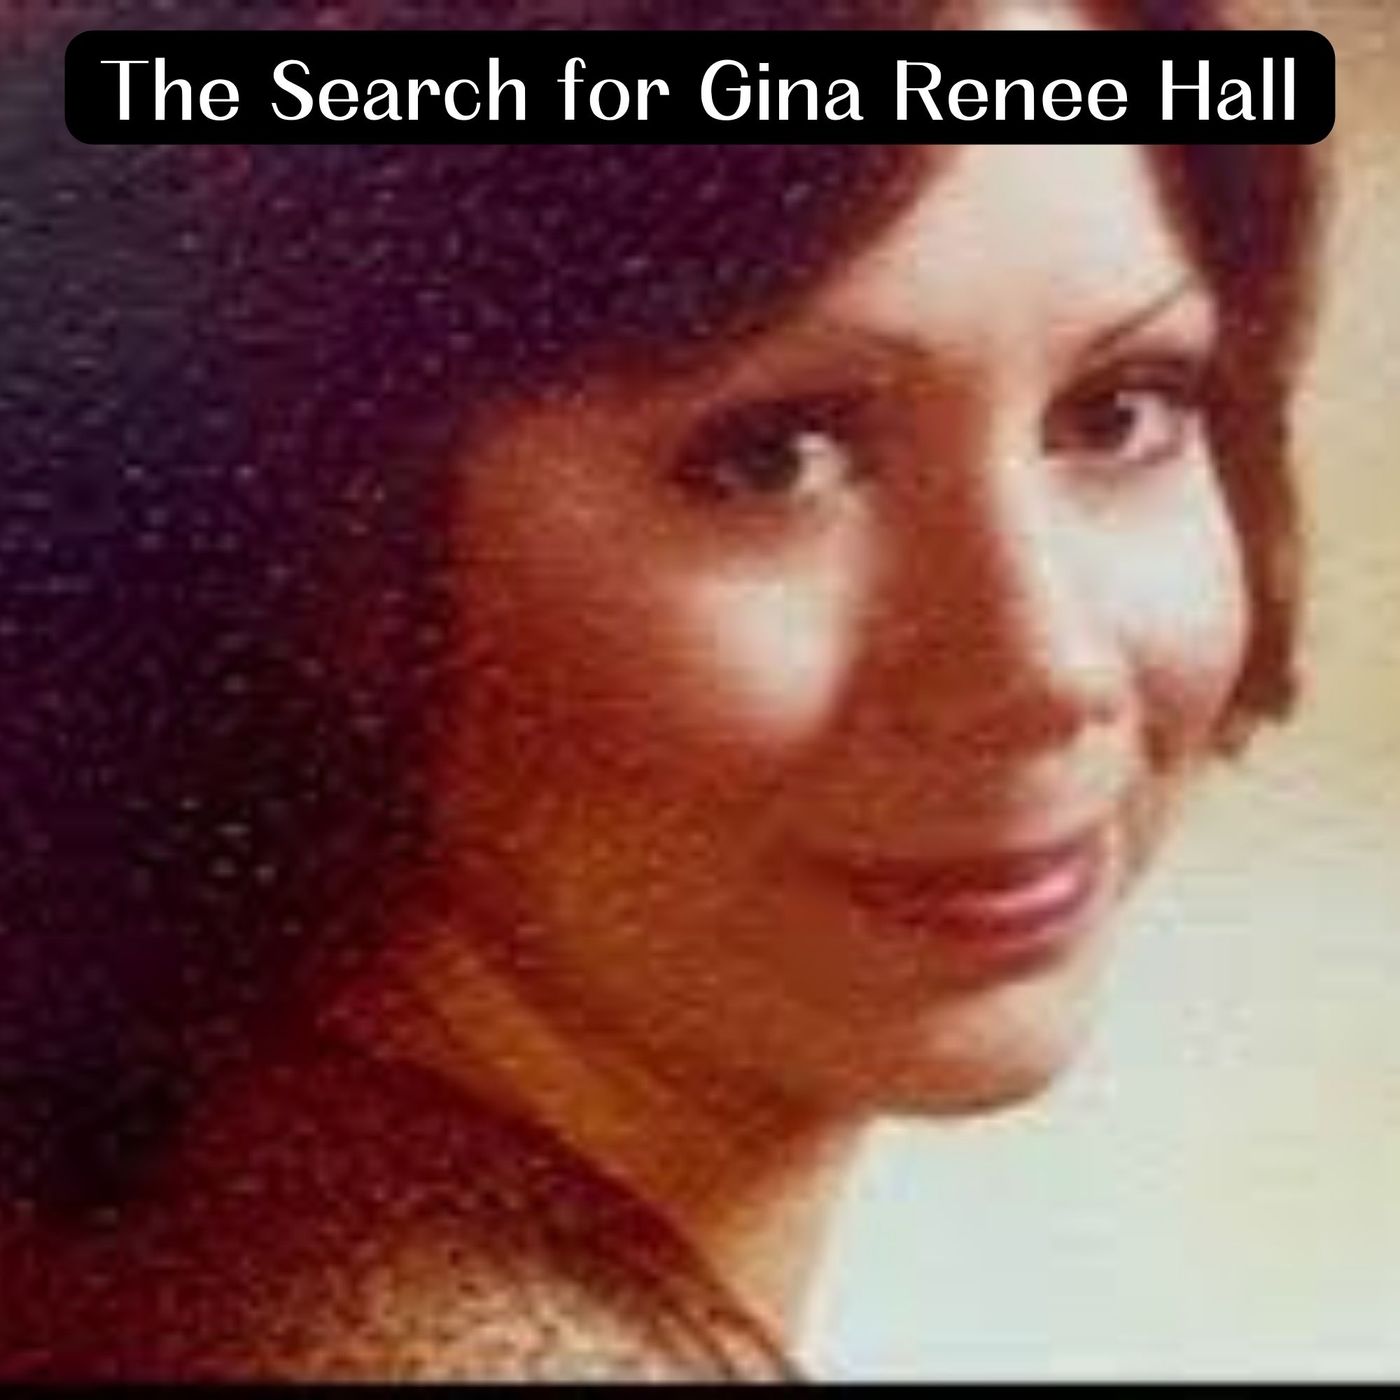 The Search for Gina Renee Hall